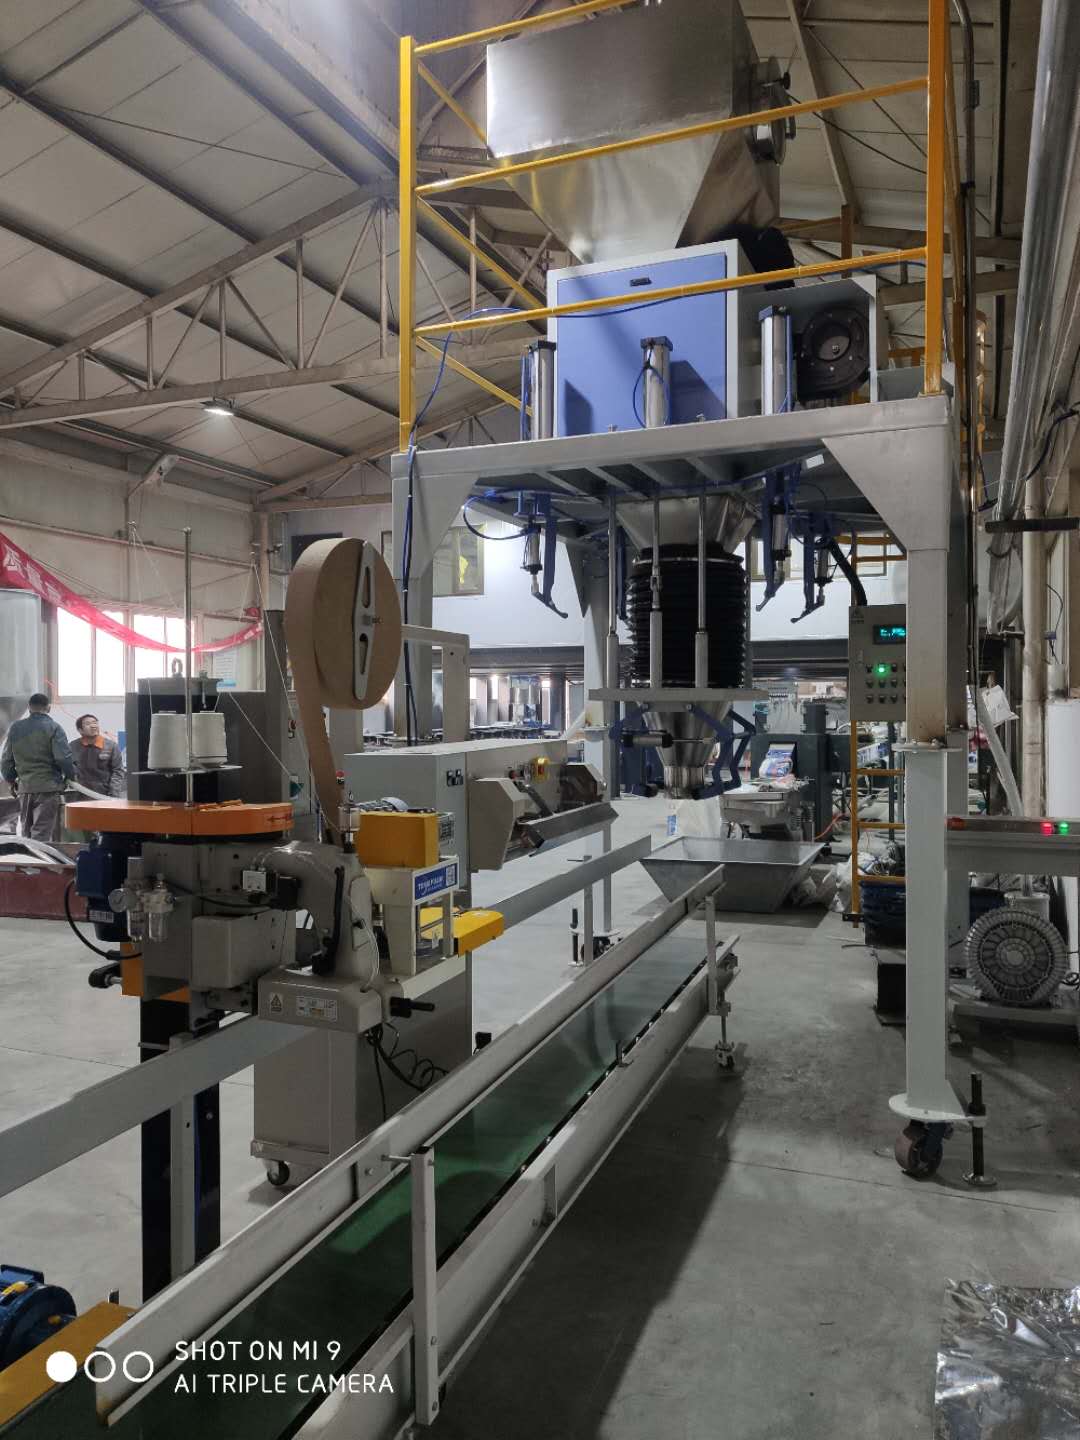 Mono Ammonium Phosphate bagging machine Automated Bagging Line Fully Automatic Packing Palletizing Line, Fully Automatic Packing Line, Fully Automatic Bagging Line, Fully Automatic filling and packagi